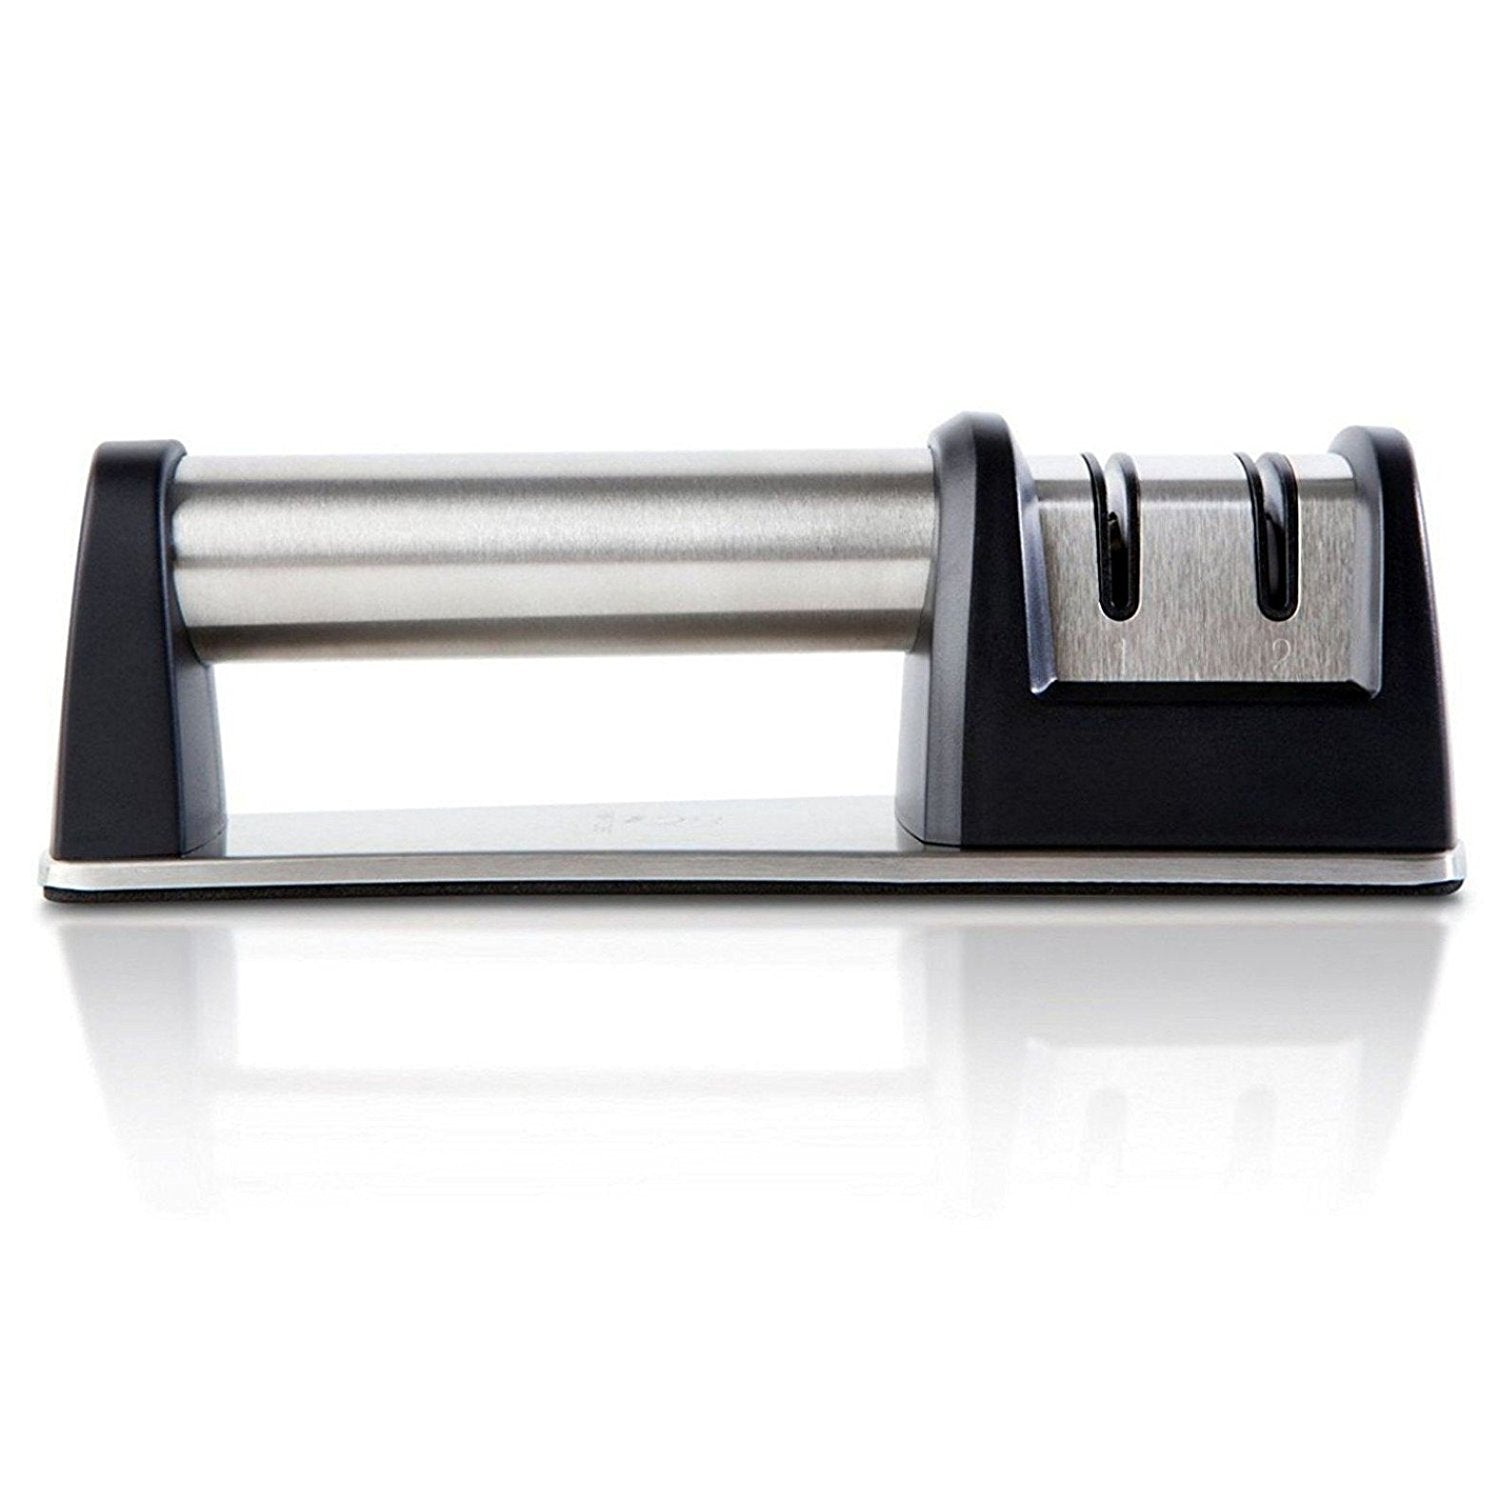 Professional Knife Sharpeners for Kitchen Knives - Diamond - Designed with  Tight Clamp, Stable Base - Easy To Assemble with Reference Guide 